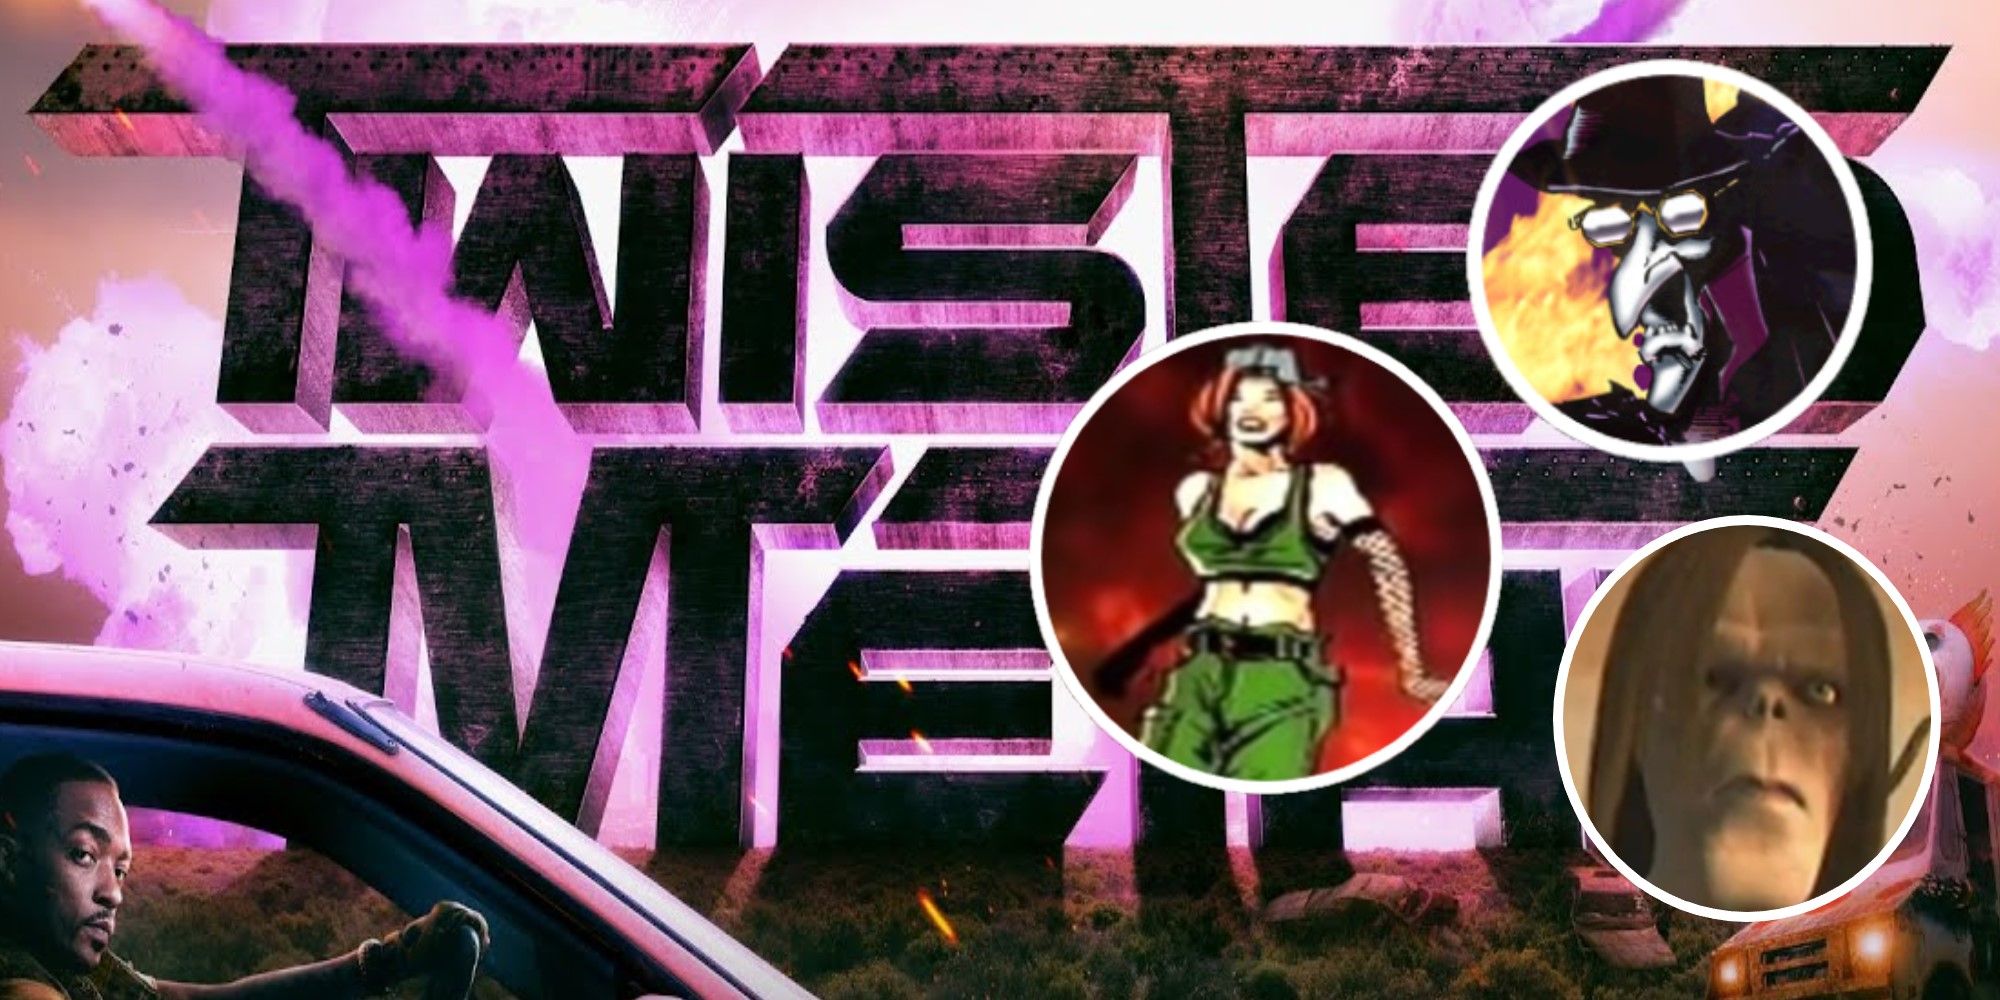 Twisted Metal Split Image Peacock Show Logo With Twisted Metal 2 Mortimor And Krista Sparks and Twisted Metal Black Billy Ray Stillwell